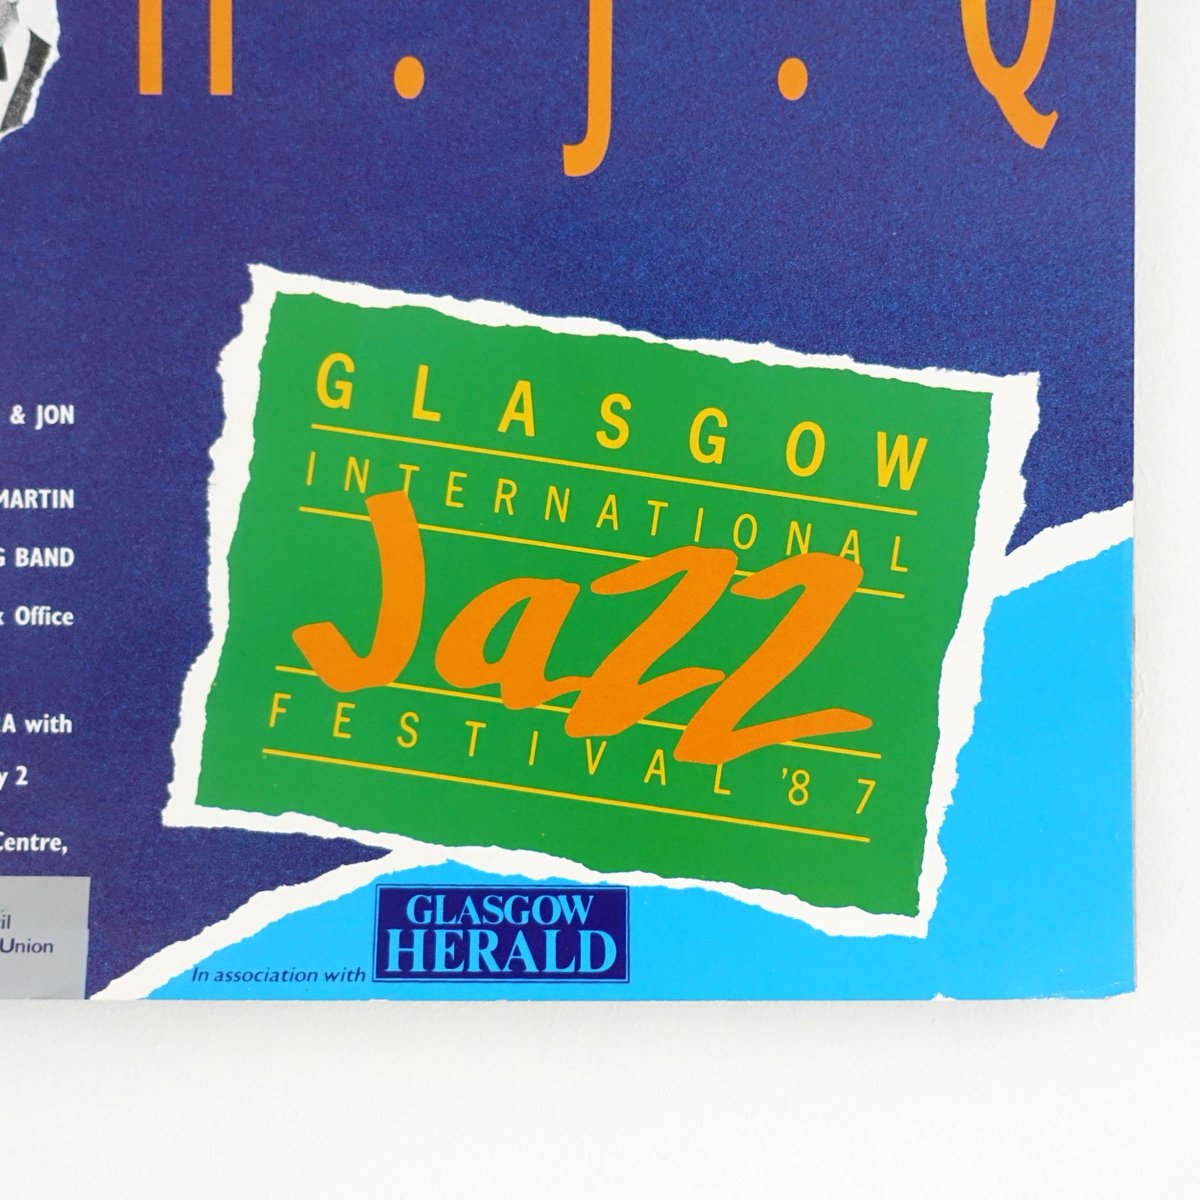 Dug this amazing poster for the original 1987 @GlasgowJazzFest out of the family archives. My grandad was one of the festival organisers. Not sure who did the design but love the classic 80's graphics! #graphicdesign #posterdesign #jazz #glasgowjazzfestival #glasgow #80s